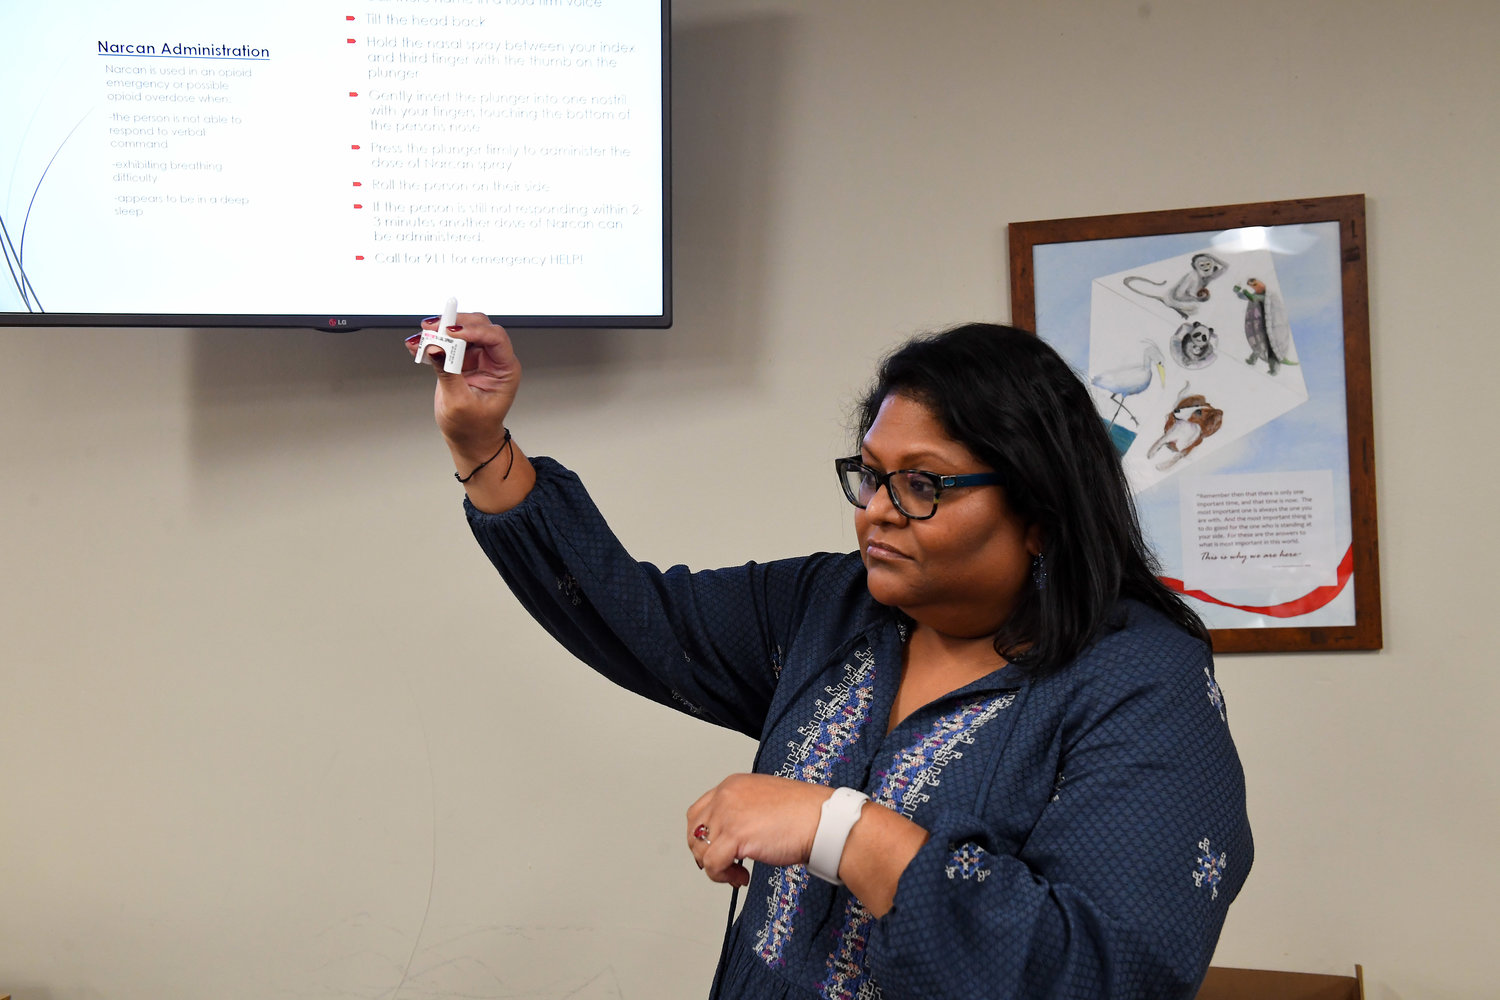 Cindy Wolff, executive director of the Tempo Group, a community counseling center that provided the training, demonstrated how naloxone, a medication that reverses the effects of an overdose, is used.